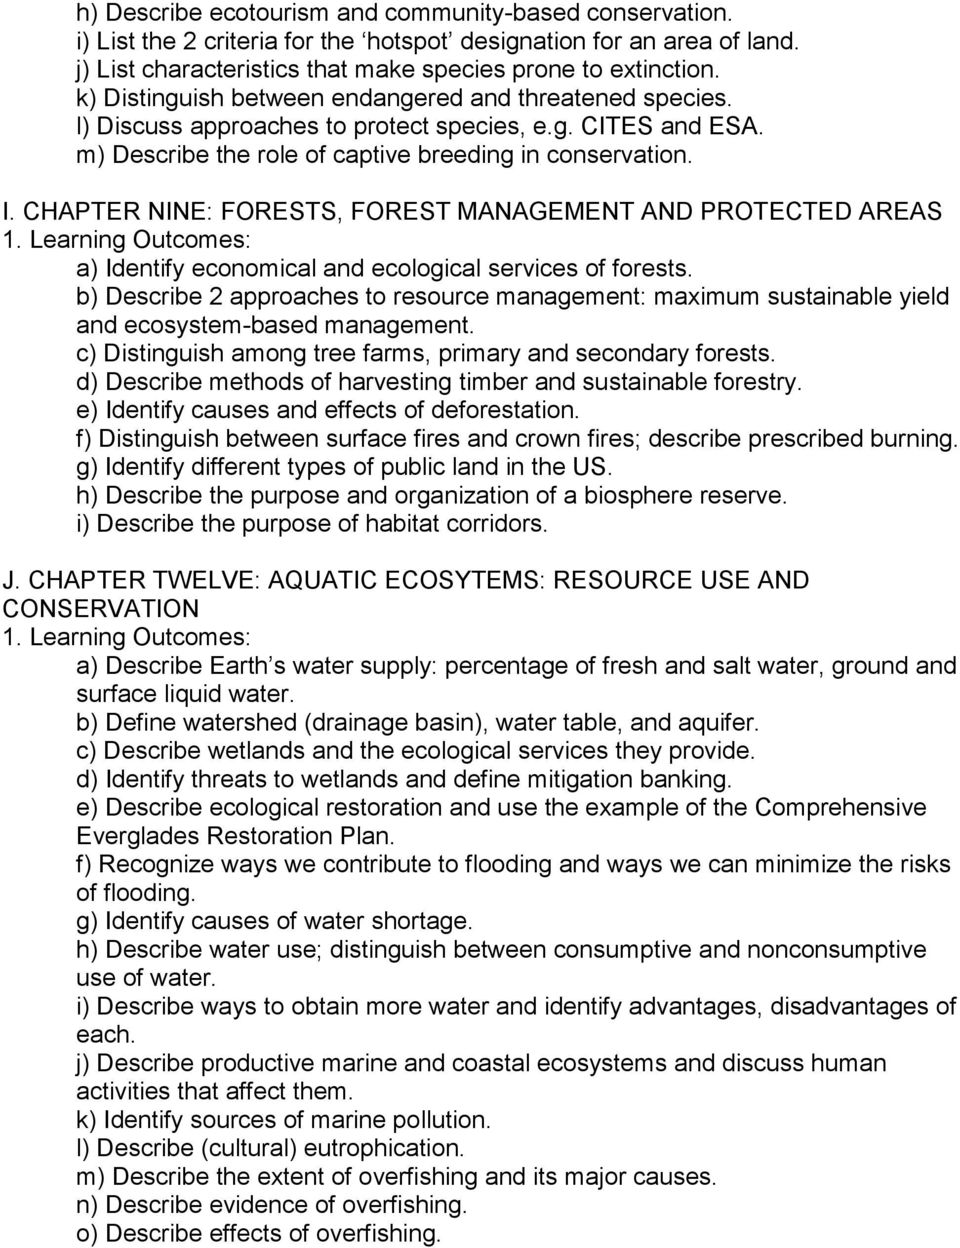 CHAPTER NINE: FORESTS, FOREST MANAGEMENT AND PROTECTED AREAS a) Identify economical and ecological services of forests.